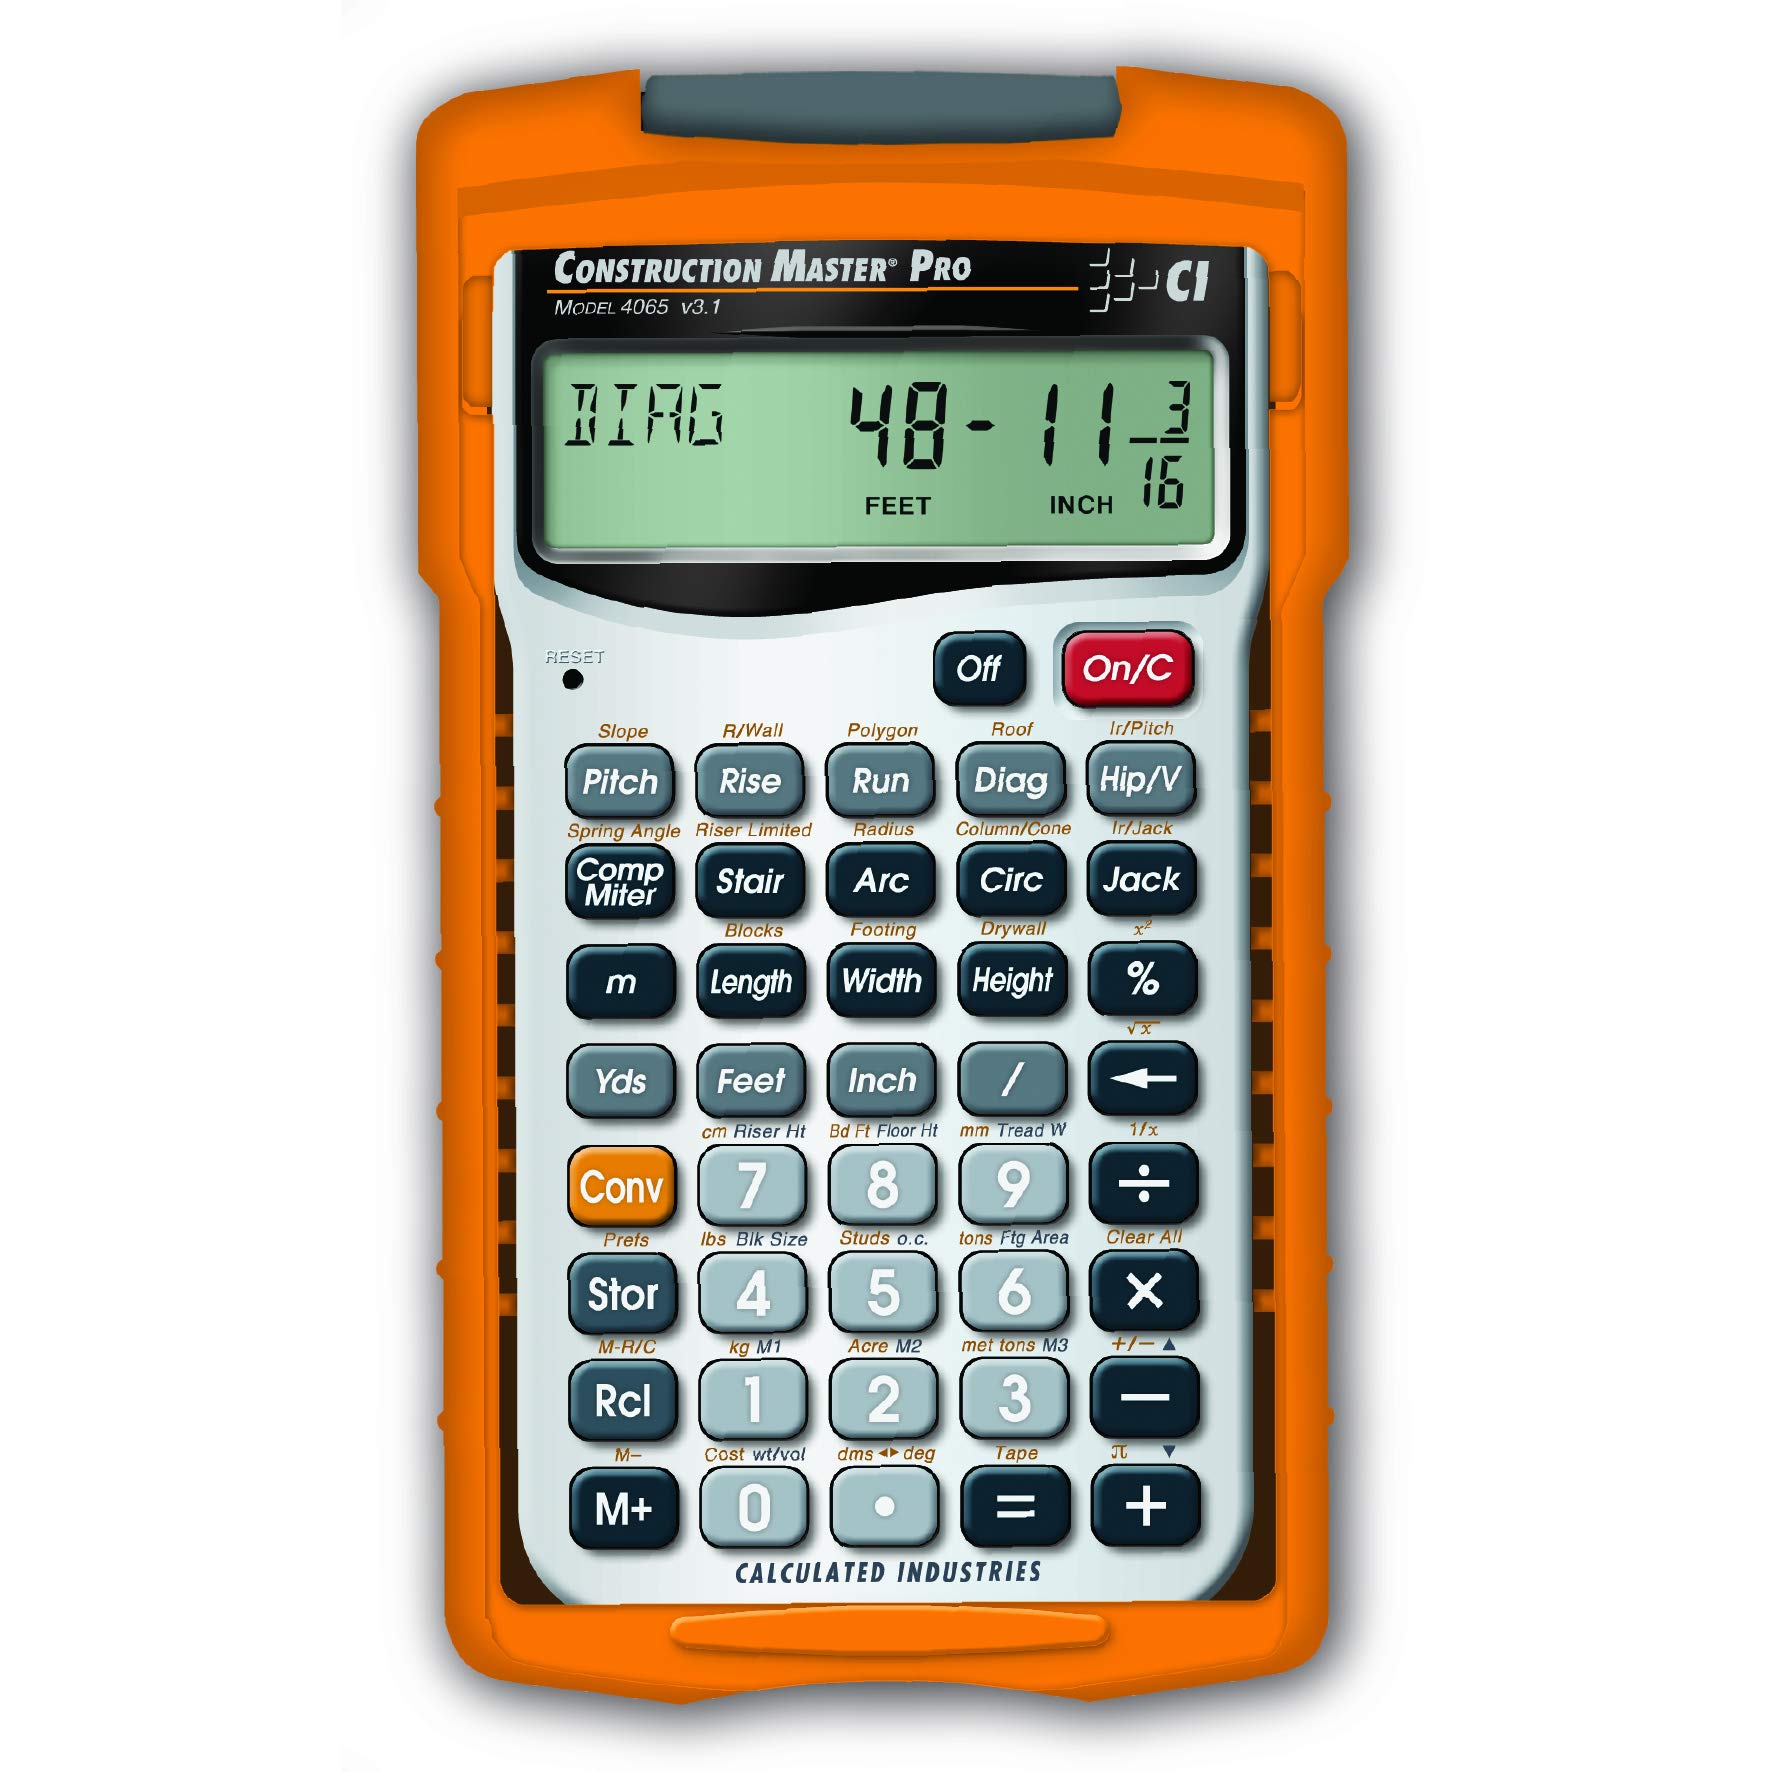 Calculated Industries 6135 Scale Master Pro XE Advanced Digital Plan Measure, White & 4065 Construction Master Pro Advanced Construction Math Feet-inch-Fraction Calculator